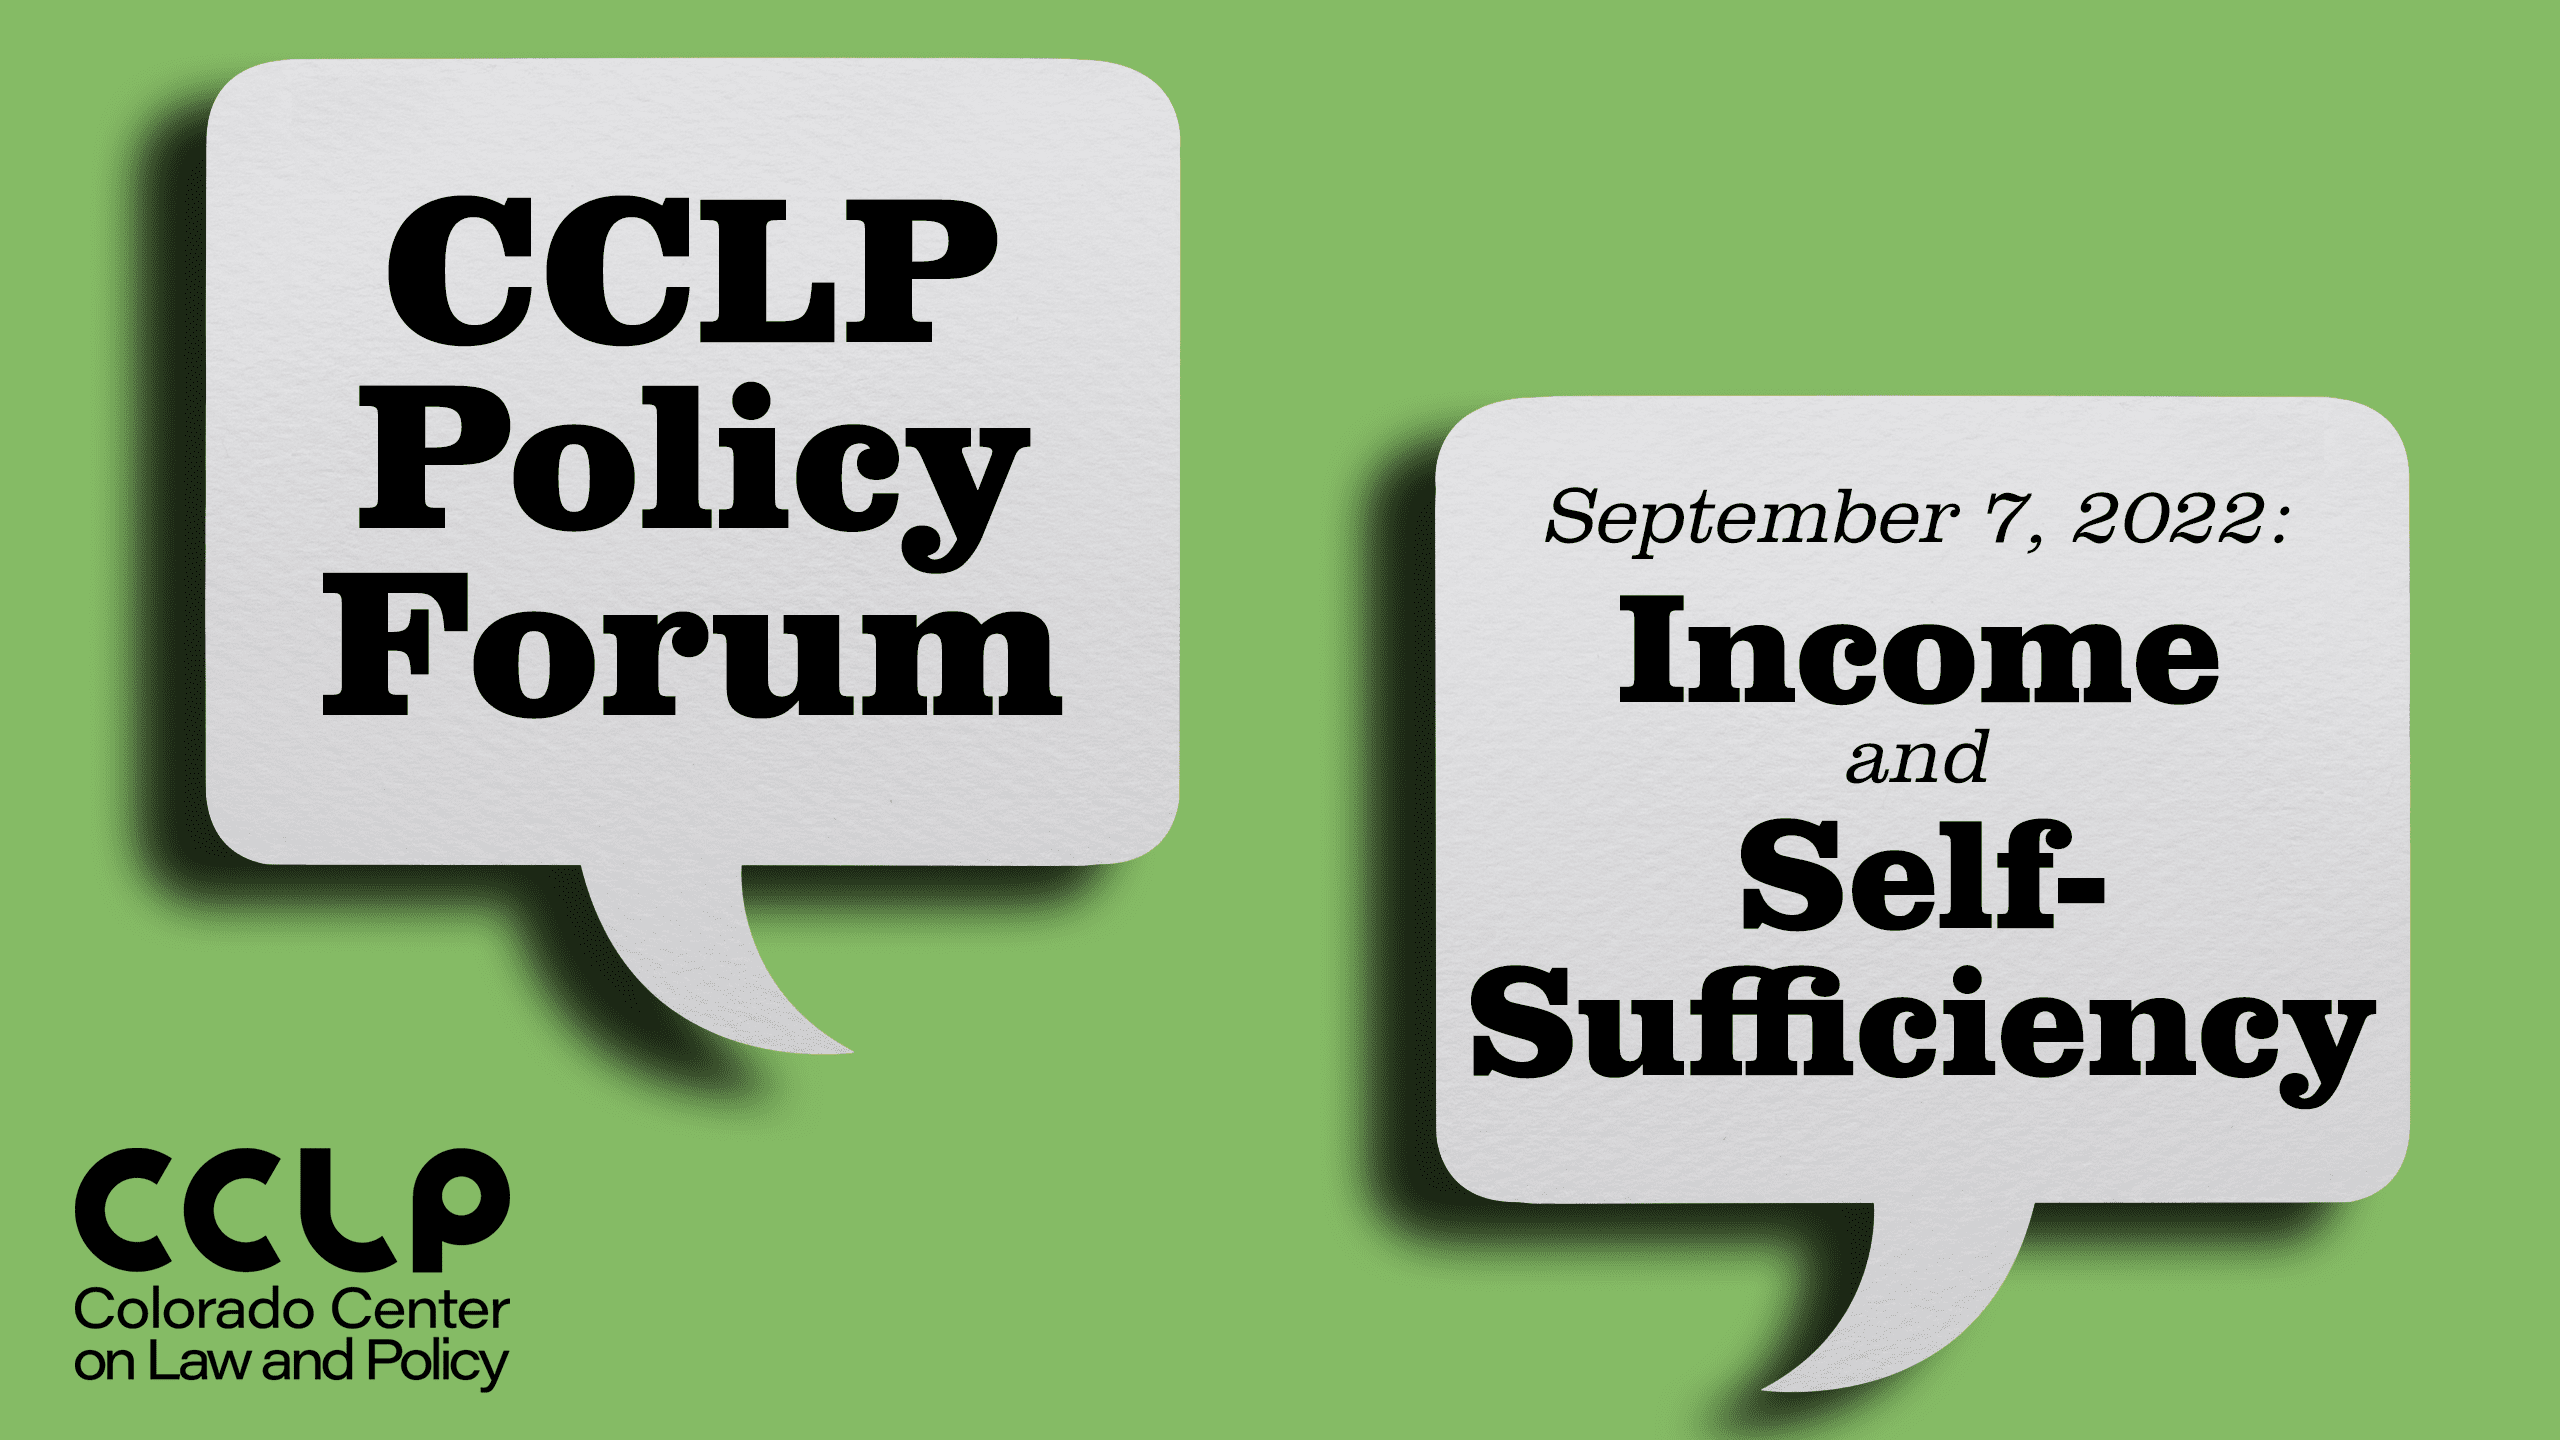 CCLP Policy Forum: Sept 7, Income and Self-Sufficiency